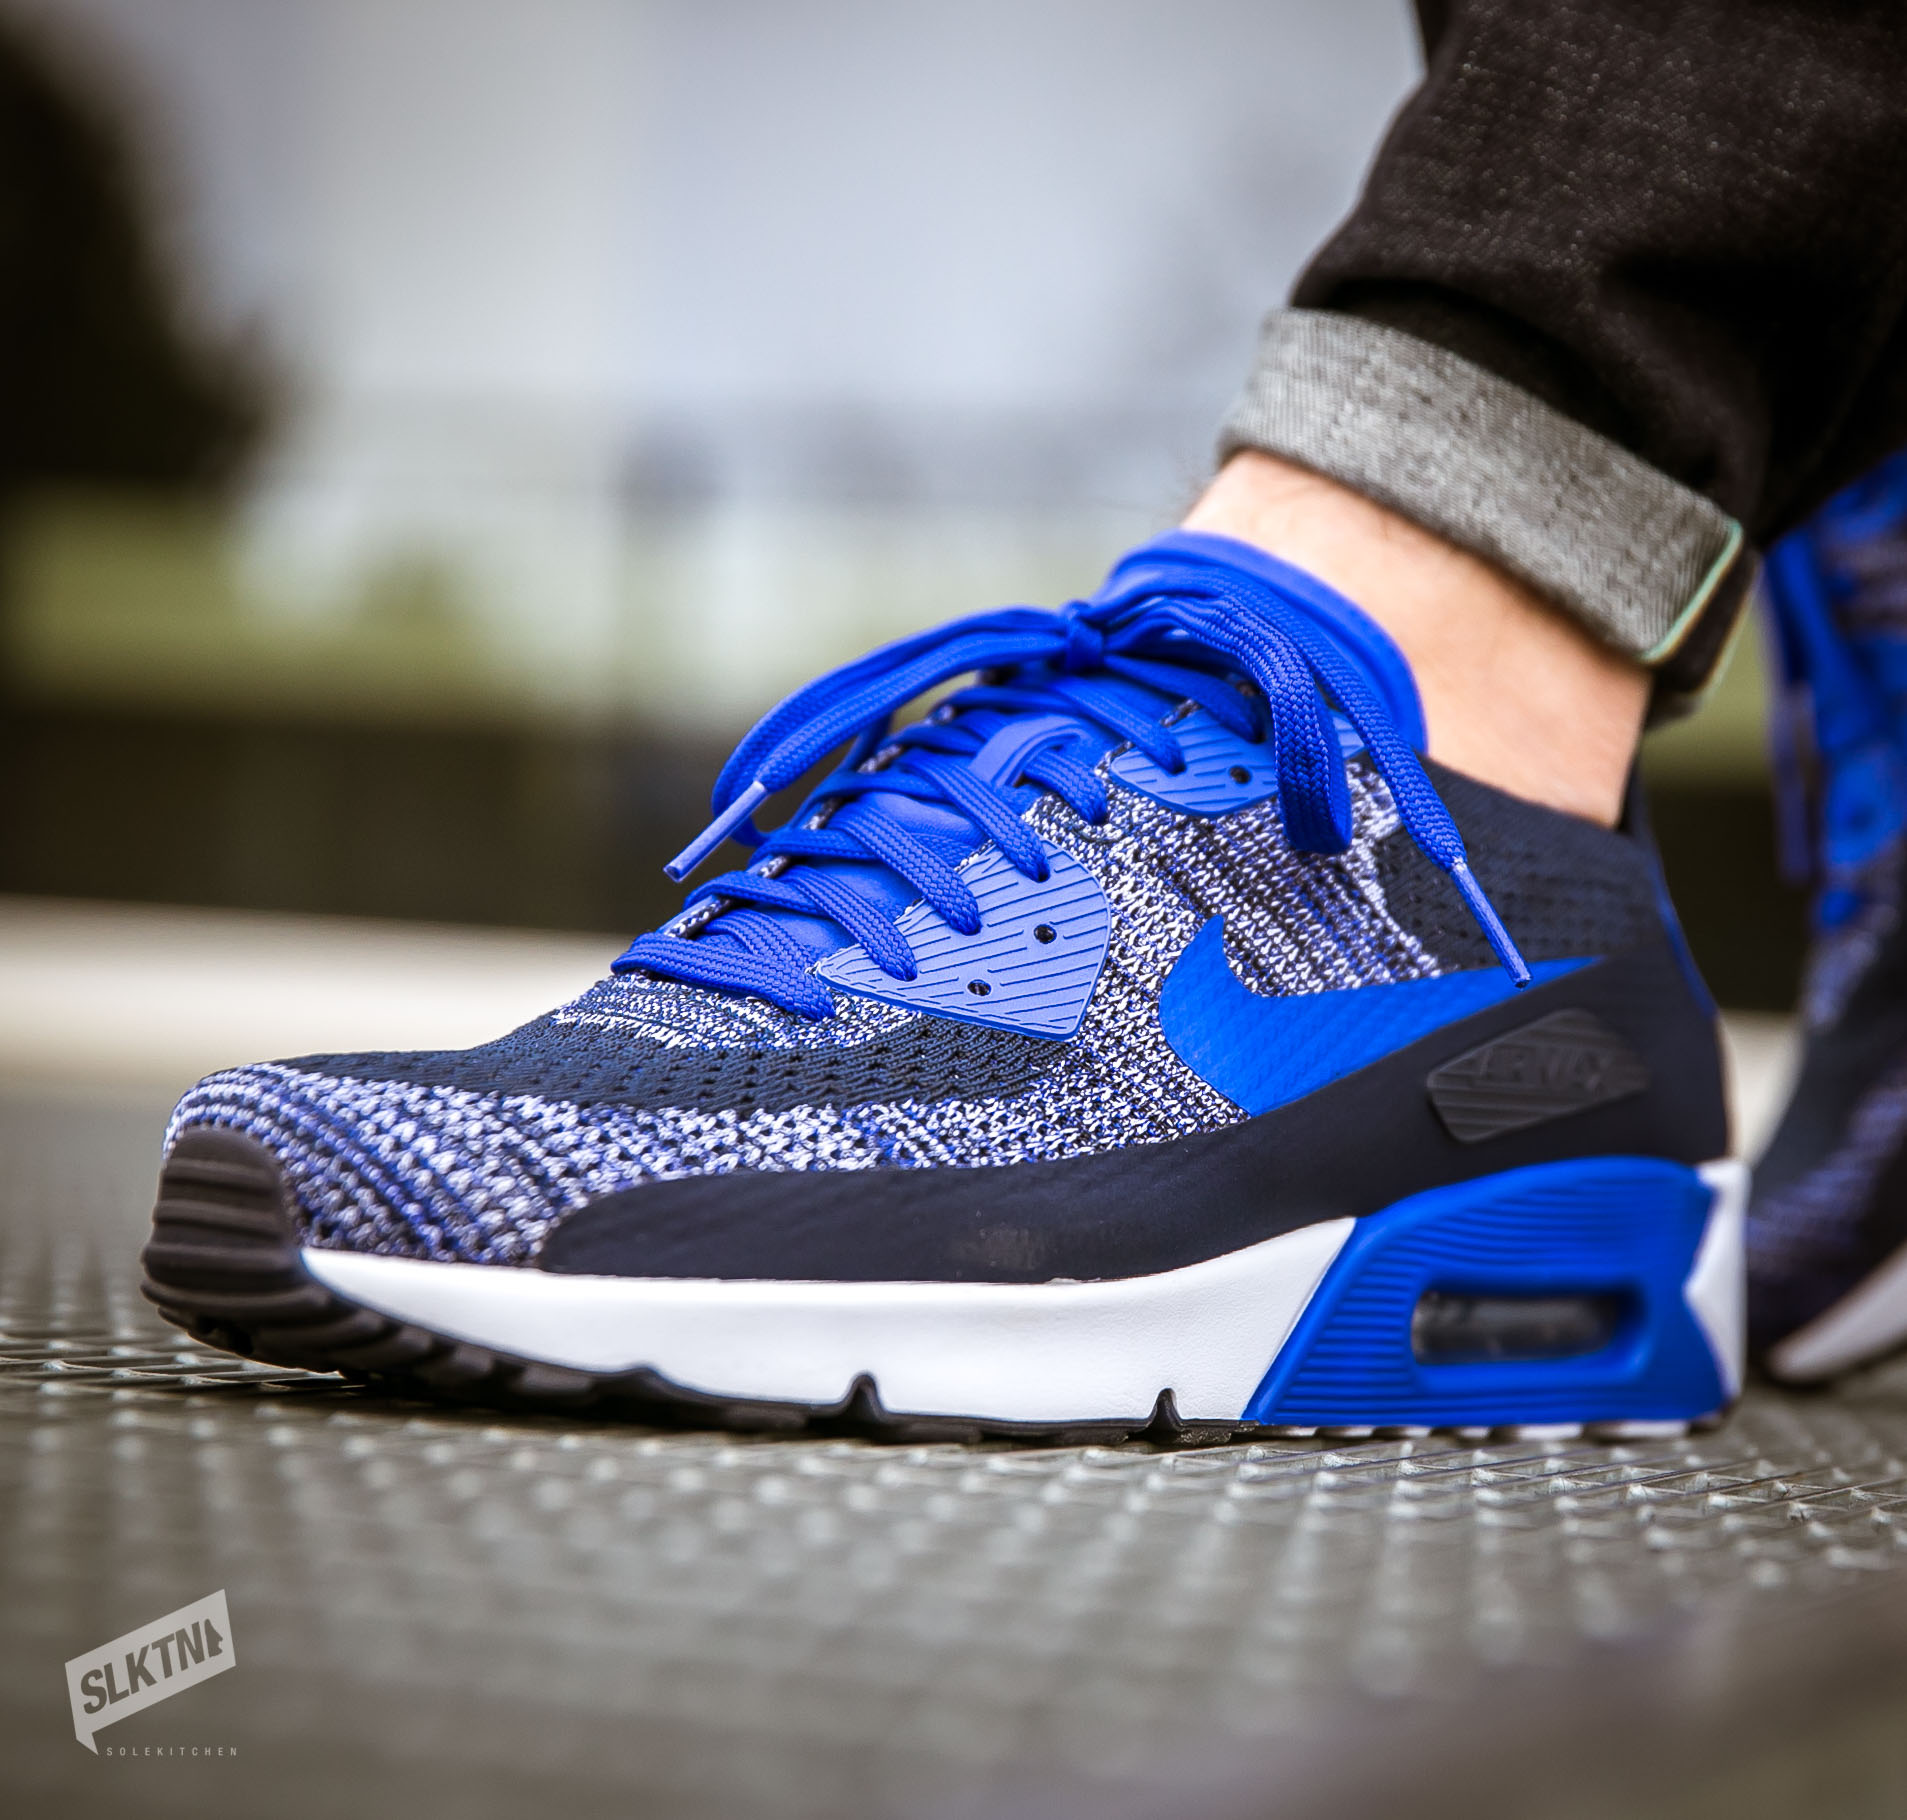 The Nike Air Max 90 Ultra 2.0 Flyknit Armory Navy On-Feet